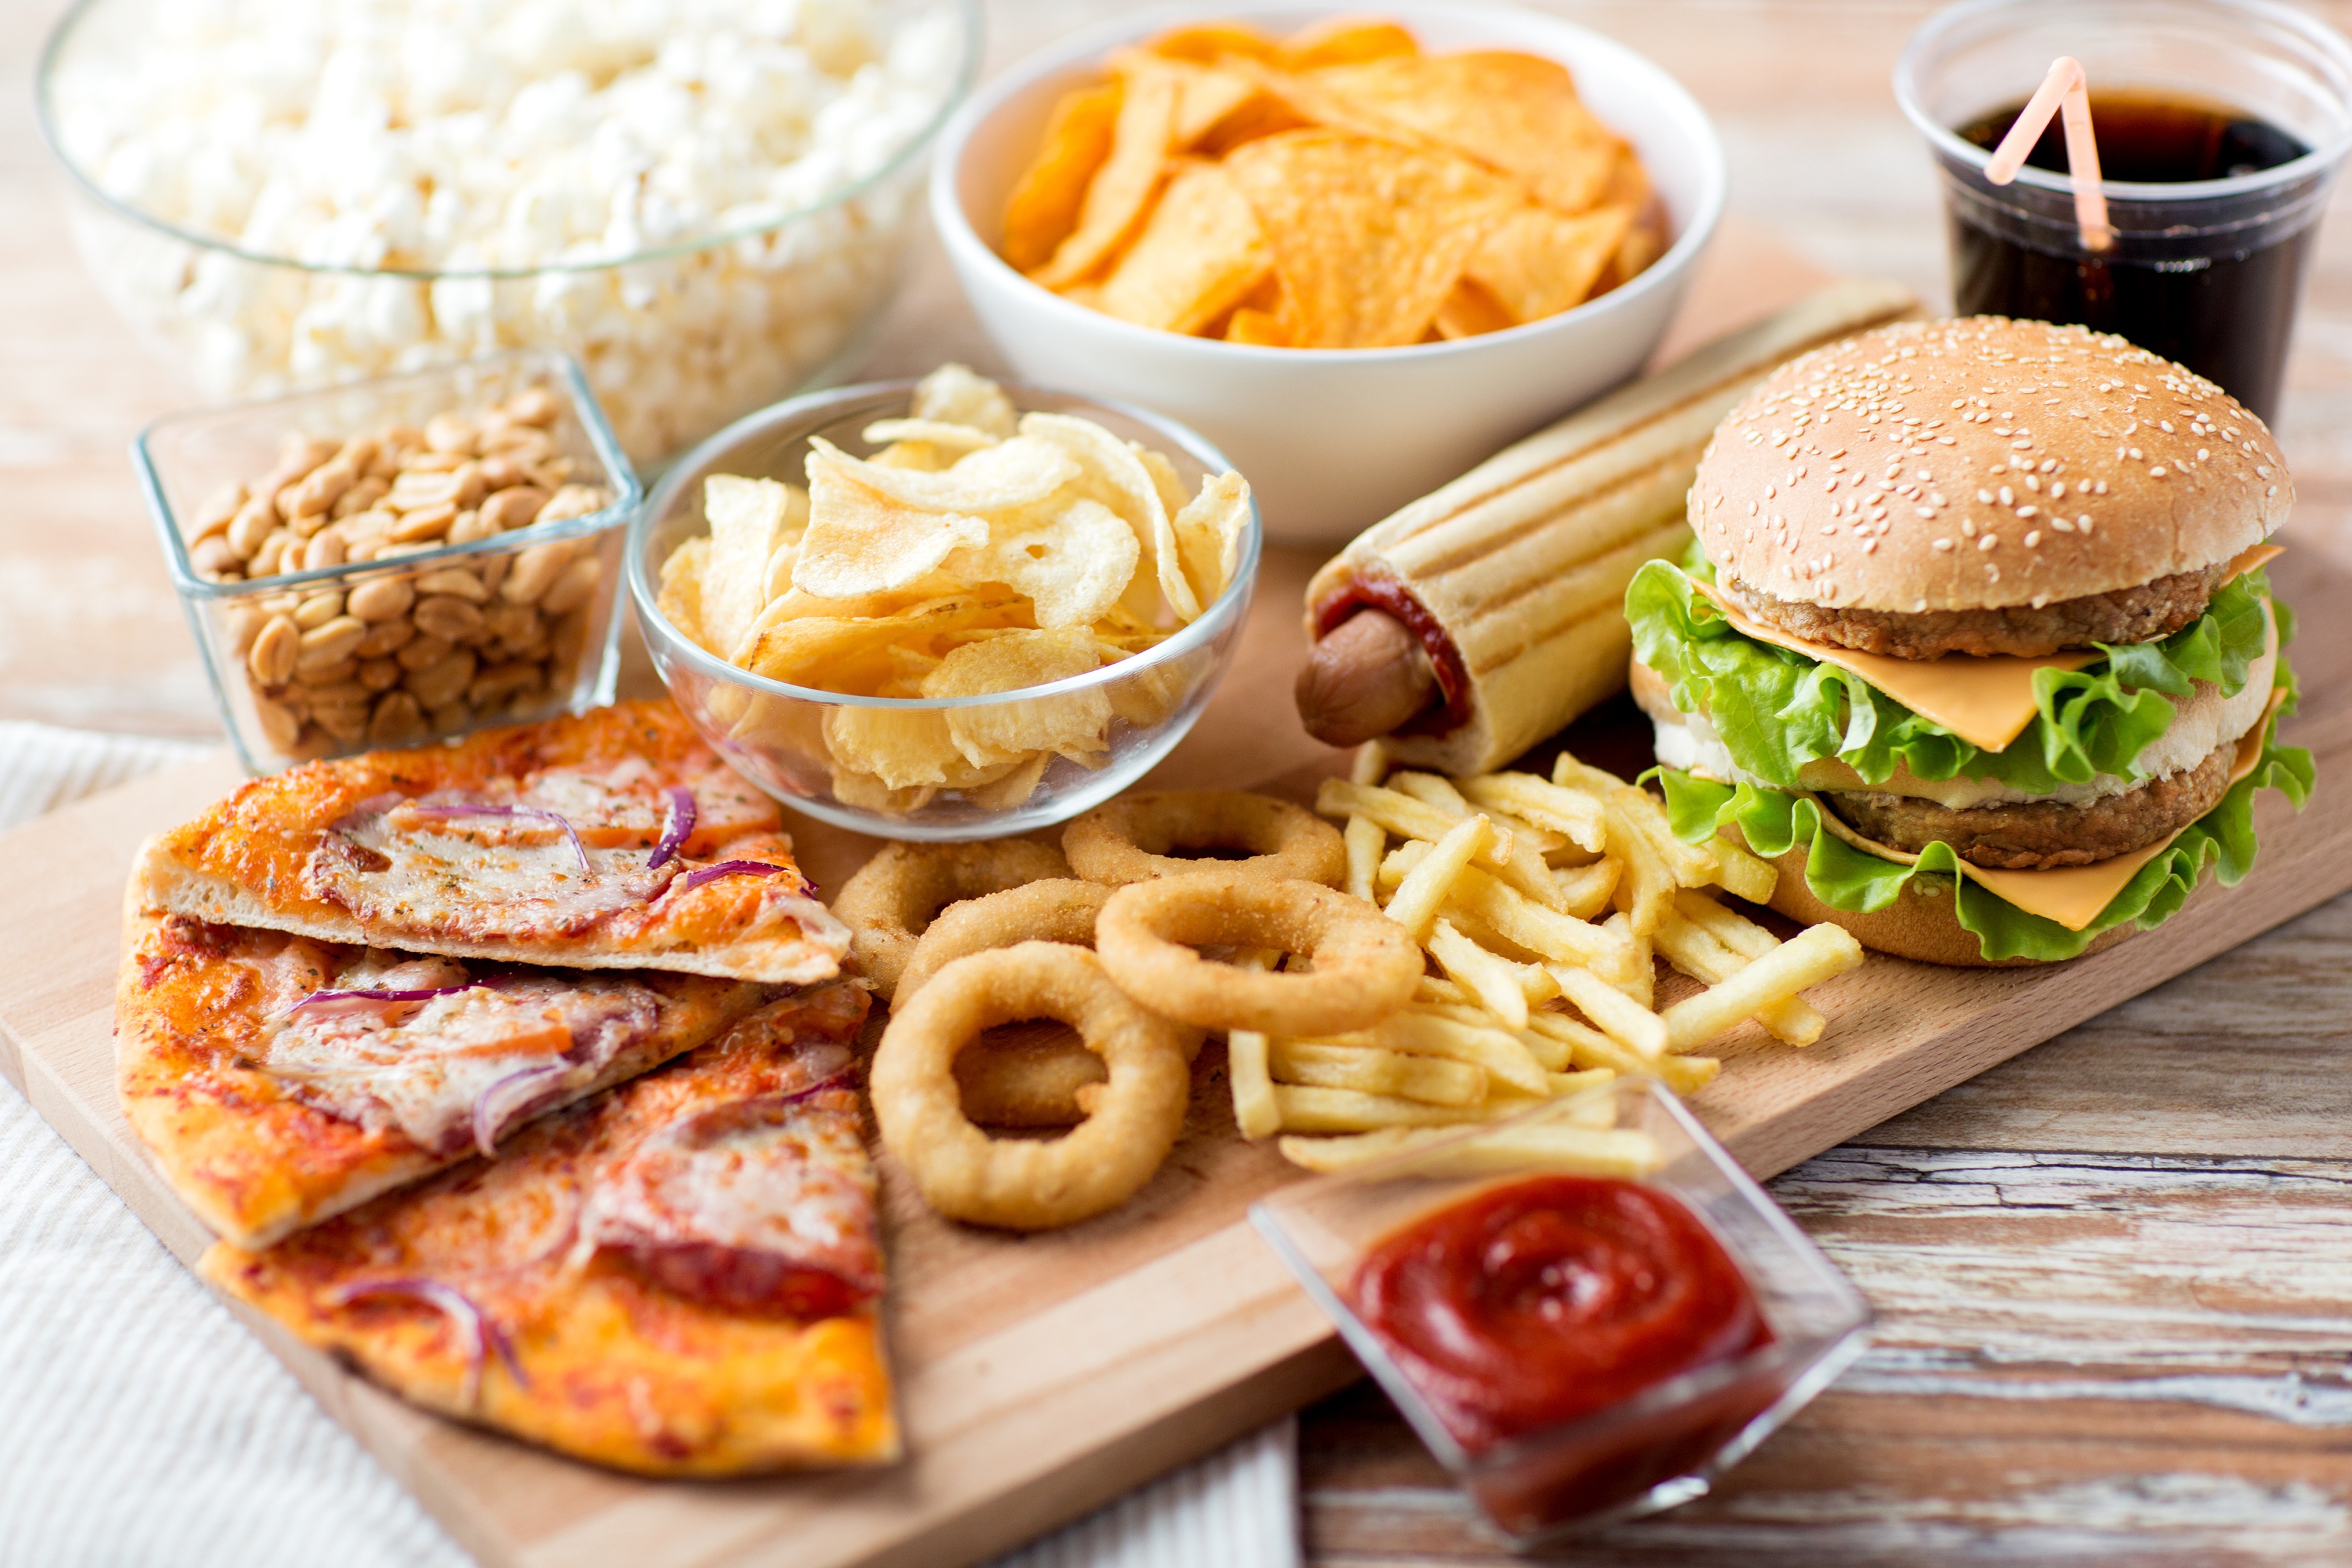 pizza, food, still life, burger, chips, french fries